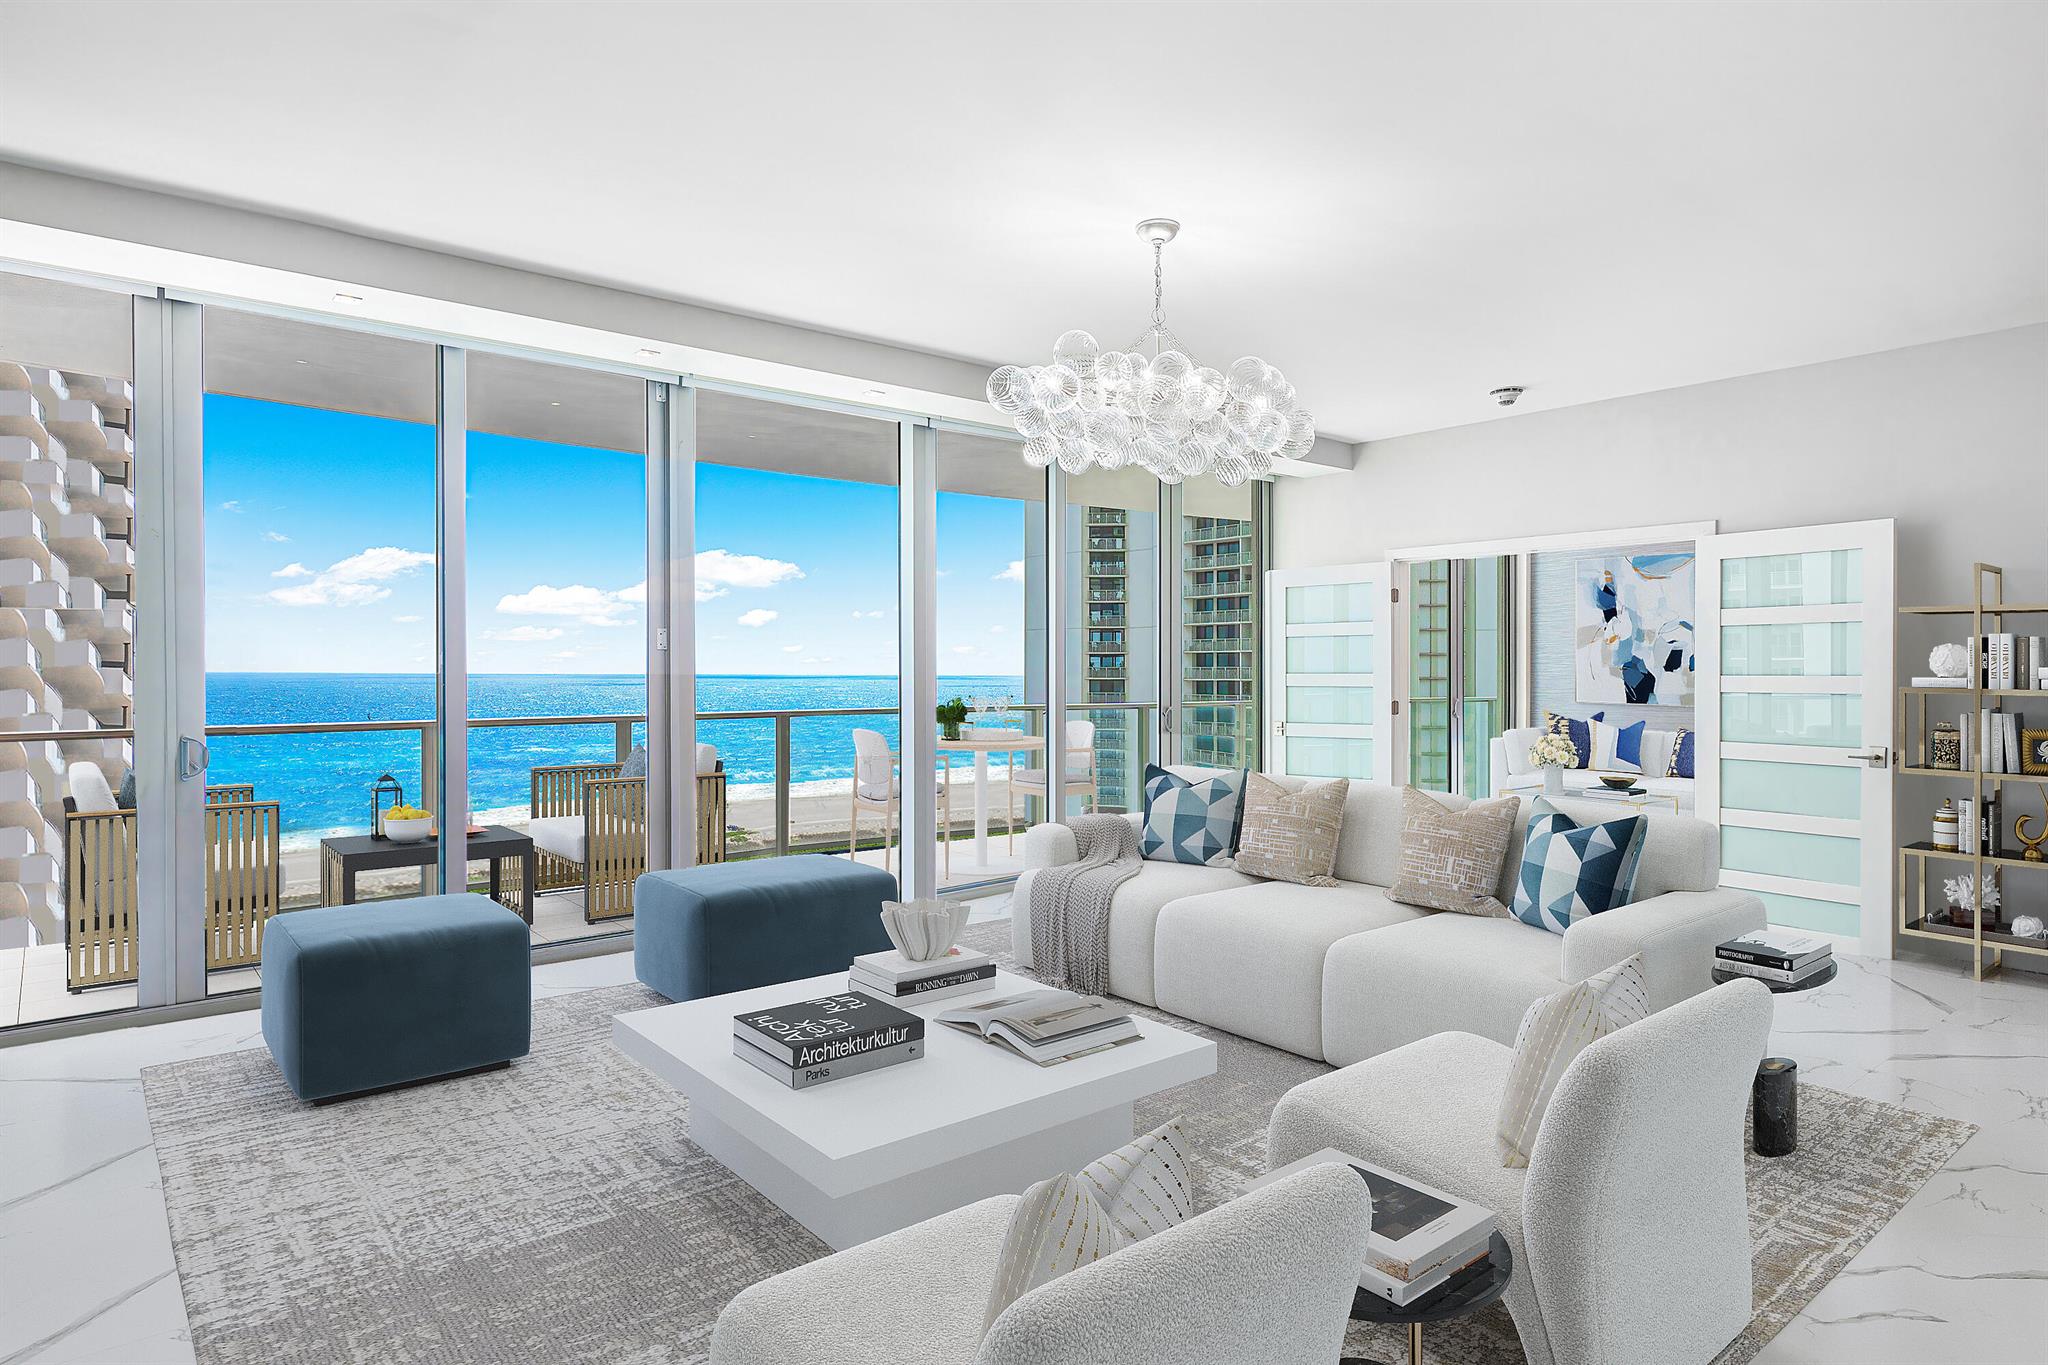 Wake up to unforgettable sunrises at this stunning oceanfront residence on Singer Island, where casual elegance meets unparalleled luxury living. This new construction, fully furnished condo offers floor-to-ceiling windows and unobstructed ocean views from every room, providing a serene and breathtaking backdrop to your daily life. This spacious unit boasts 3 bedrooms, 3 bathrooms and 360 SF terrace accessible from all rooms. Whether you're lounging in the spacious living area, preparing culinary delights in the gourmet kitchen, or unwinding in the lavish master suite, every moment is enhanced by the mesmerizing backdrop of endless ocean views. With high-end finishes, designer furnishings, and top-of-the-line Miele appliances, every detail has been carefully curated to exceed the expectations of even the most discerning residents.
Outside your doorstep, a world of resort-style amenities awaits. Amrit is a Wellness Resort set on just under 8 acres with over 300' of oceanfront. Over 100,000 sqft of Wellness Amenities, incl. a 56,000 sqft Wellness Spa. Take a dip in the pool overlooking the ocean, or relax in the soothing waters of the hot tub as you soak in the breathtaking scenery. Take advantage of the four on-site restaurants. Stay active and healthy in the state-of-the-art fitness center, or pamper yourself with a rejuvenating spa treatment, indulging in the ultimate relaxation experience. Amrit offers contemporary coastal living with unmatched amenities and lifestyle in The Palm Beach.
Whether you're seeking a serene retreat, an active lifestyle, or simply a place to unwind and recharge, the Amrit Ocean Resort &amp; Residences offers the perfect blend of luxury, comfort, and convenience. Immerse yourself in the unparalleled beauty of Singer Island and experience coastal living at its finest.